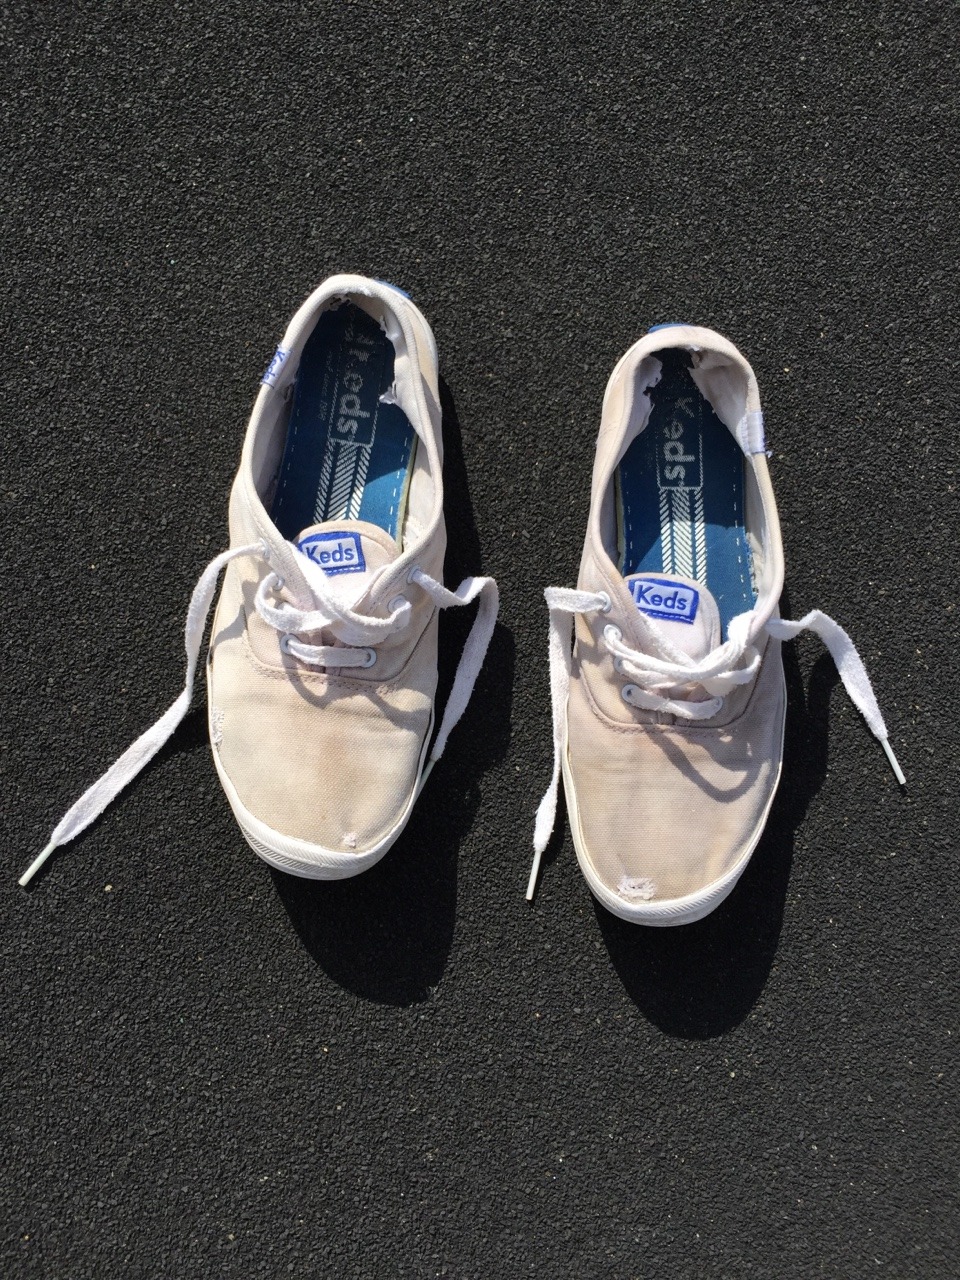 old keds shoes